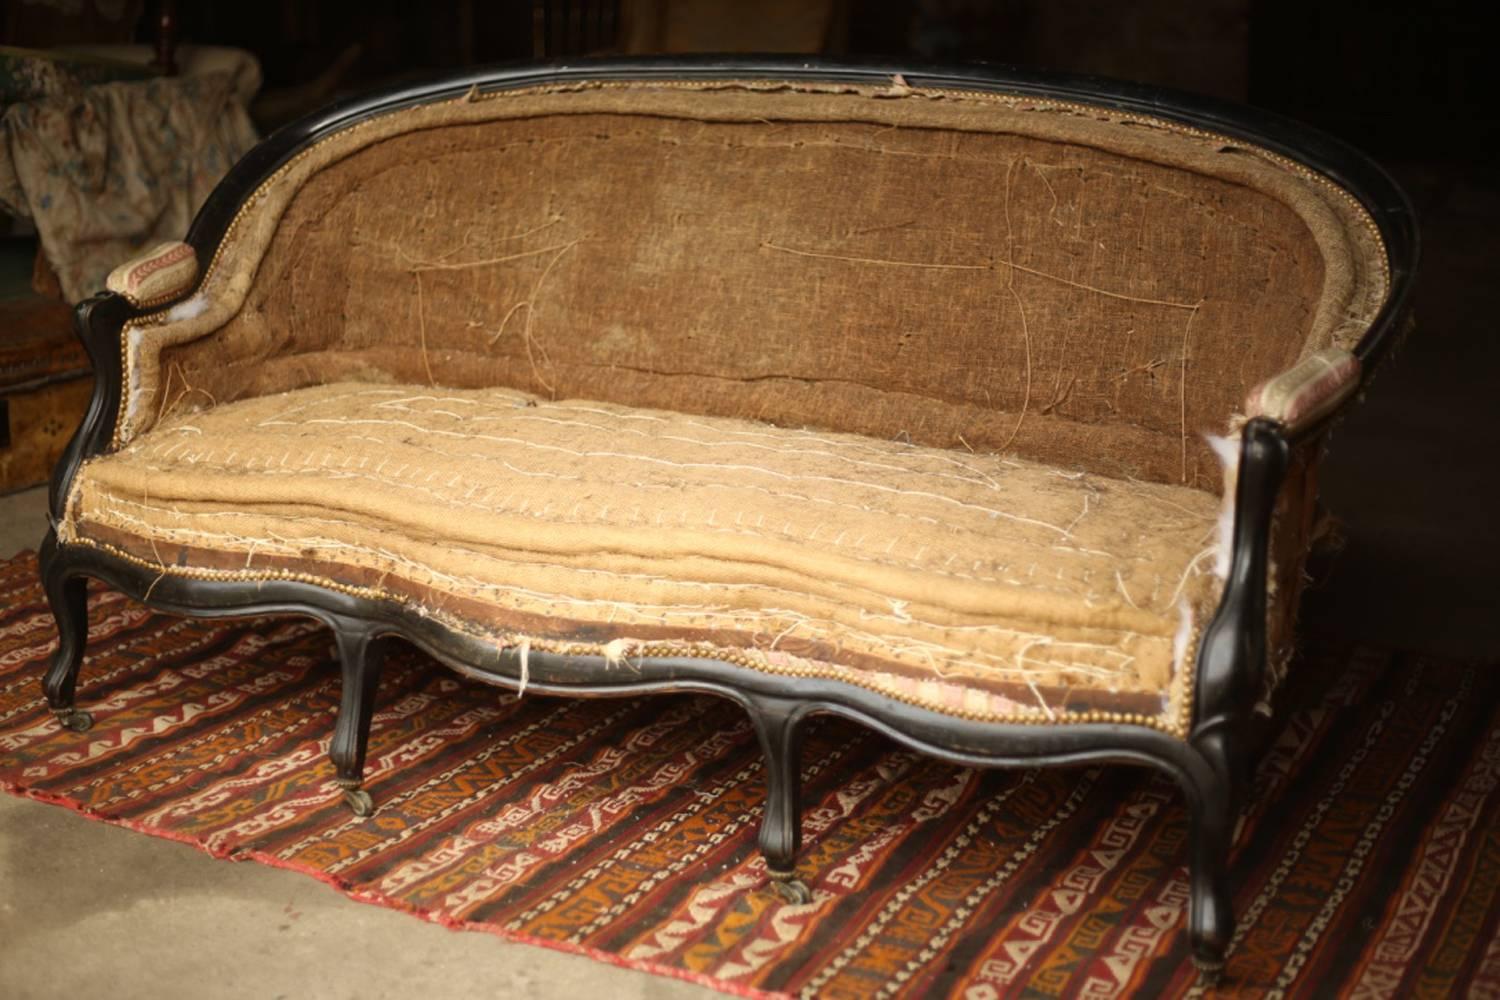 This is an exceptional 19th century Napoleon III six legged sofa with a beautiful ebonized frame. The quality of this sofa is superb, all the carved detail on the arms and legs. All six legs are complete with stone casters. There are four at the